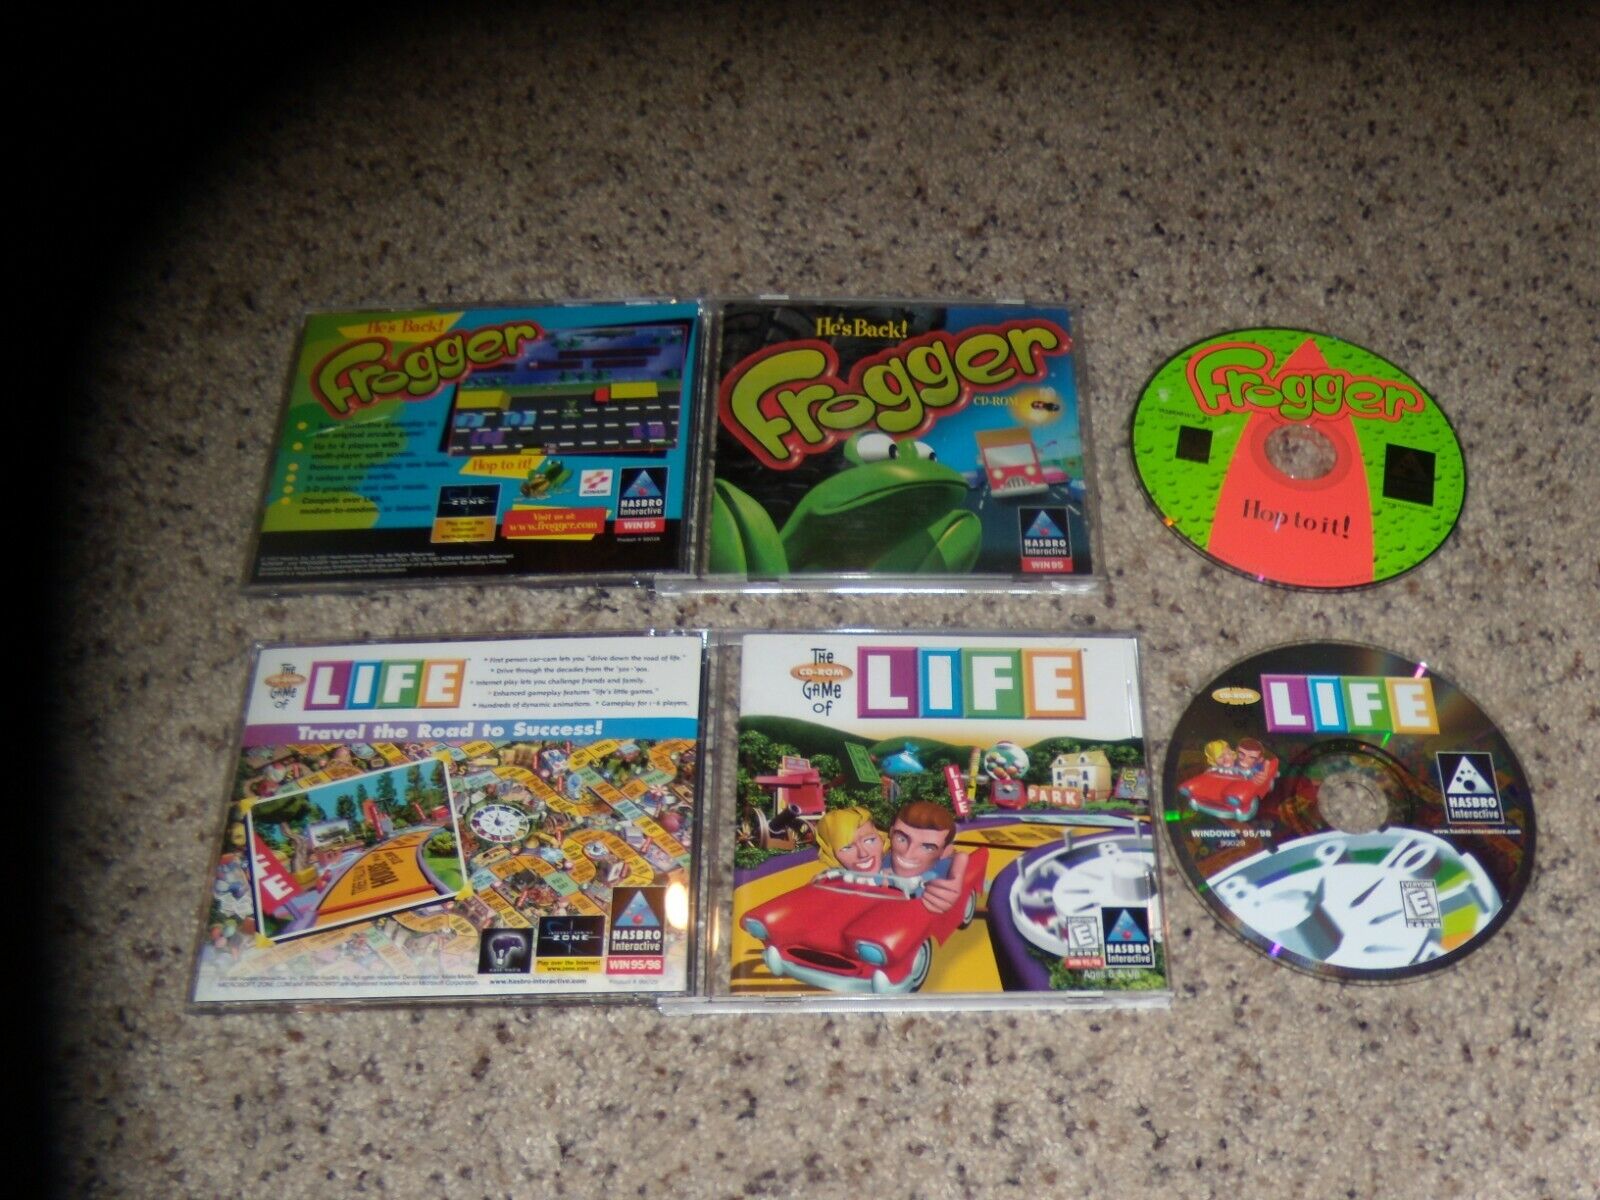 2 PC Games: Frogger and The Game of Life